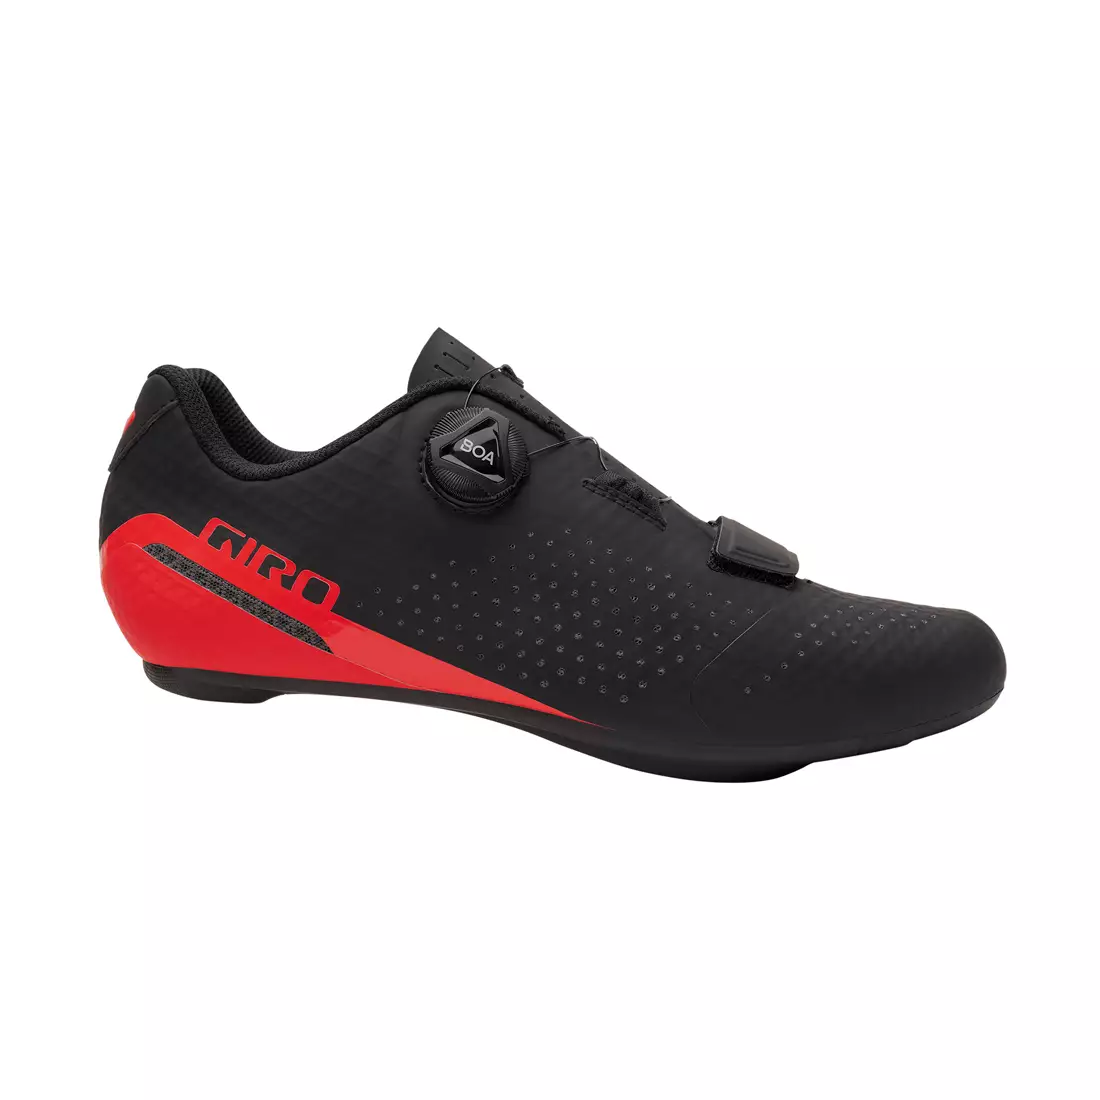 GIRO men's bicycle shoes CADET black bright red GR-7126122